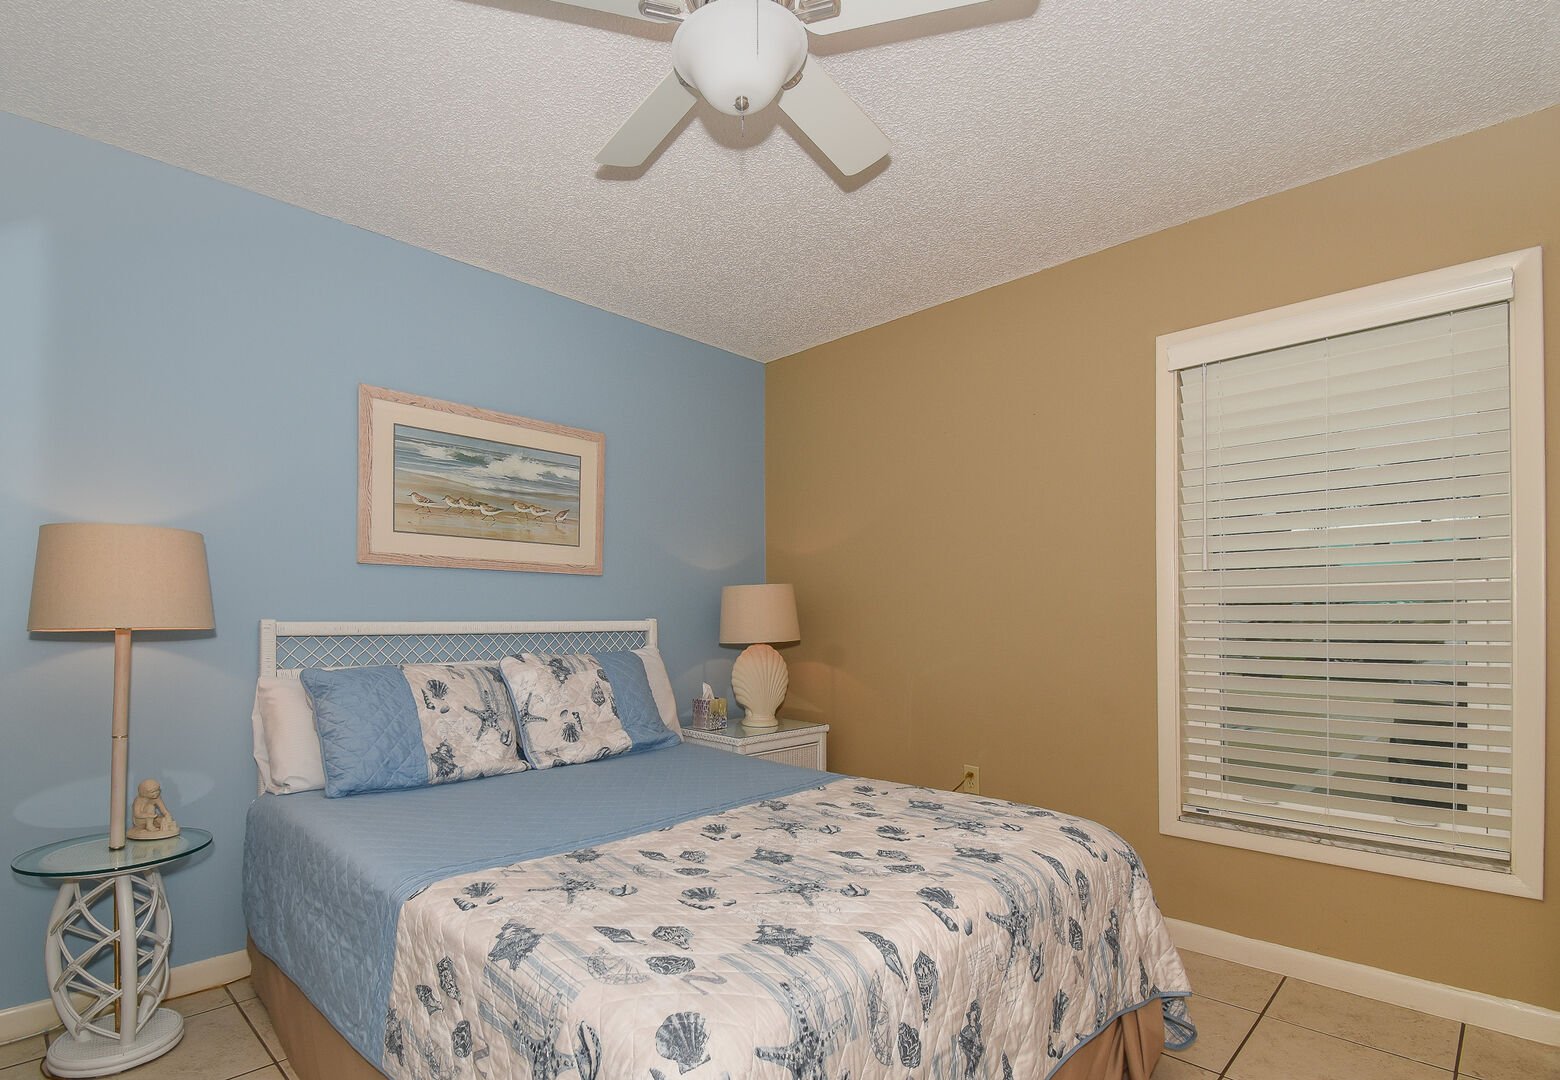 Bedroom with Reef Themed Decor at New Smyrna Beach Vacation Rentals